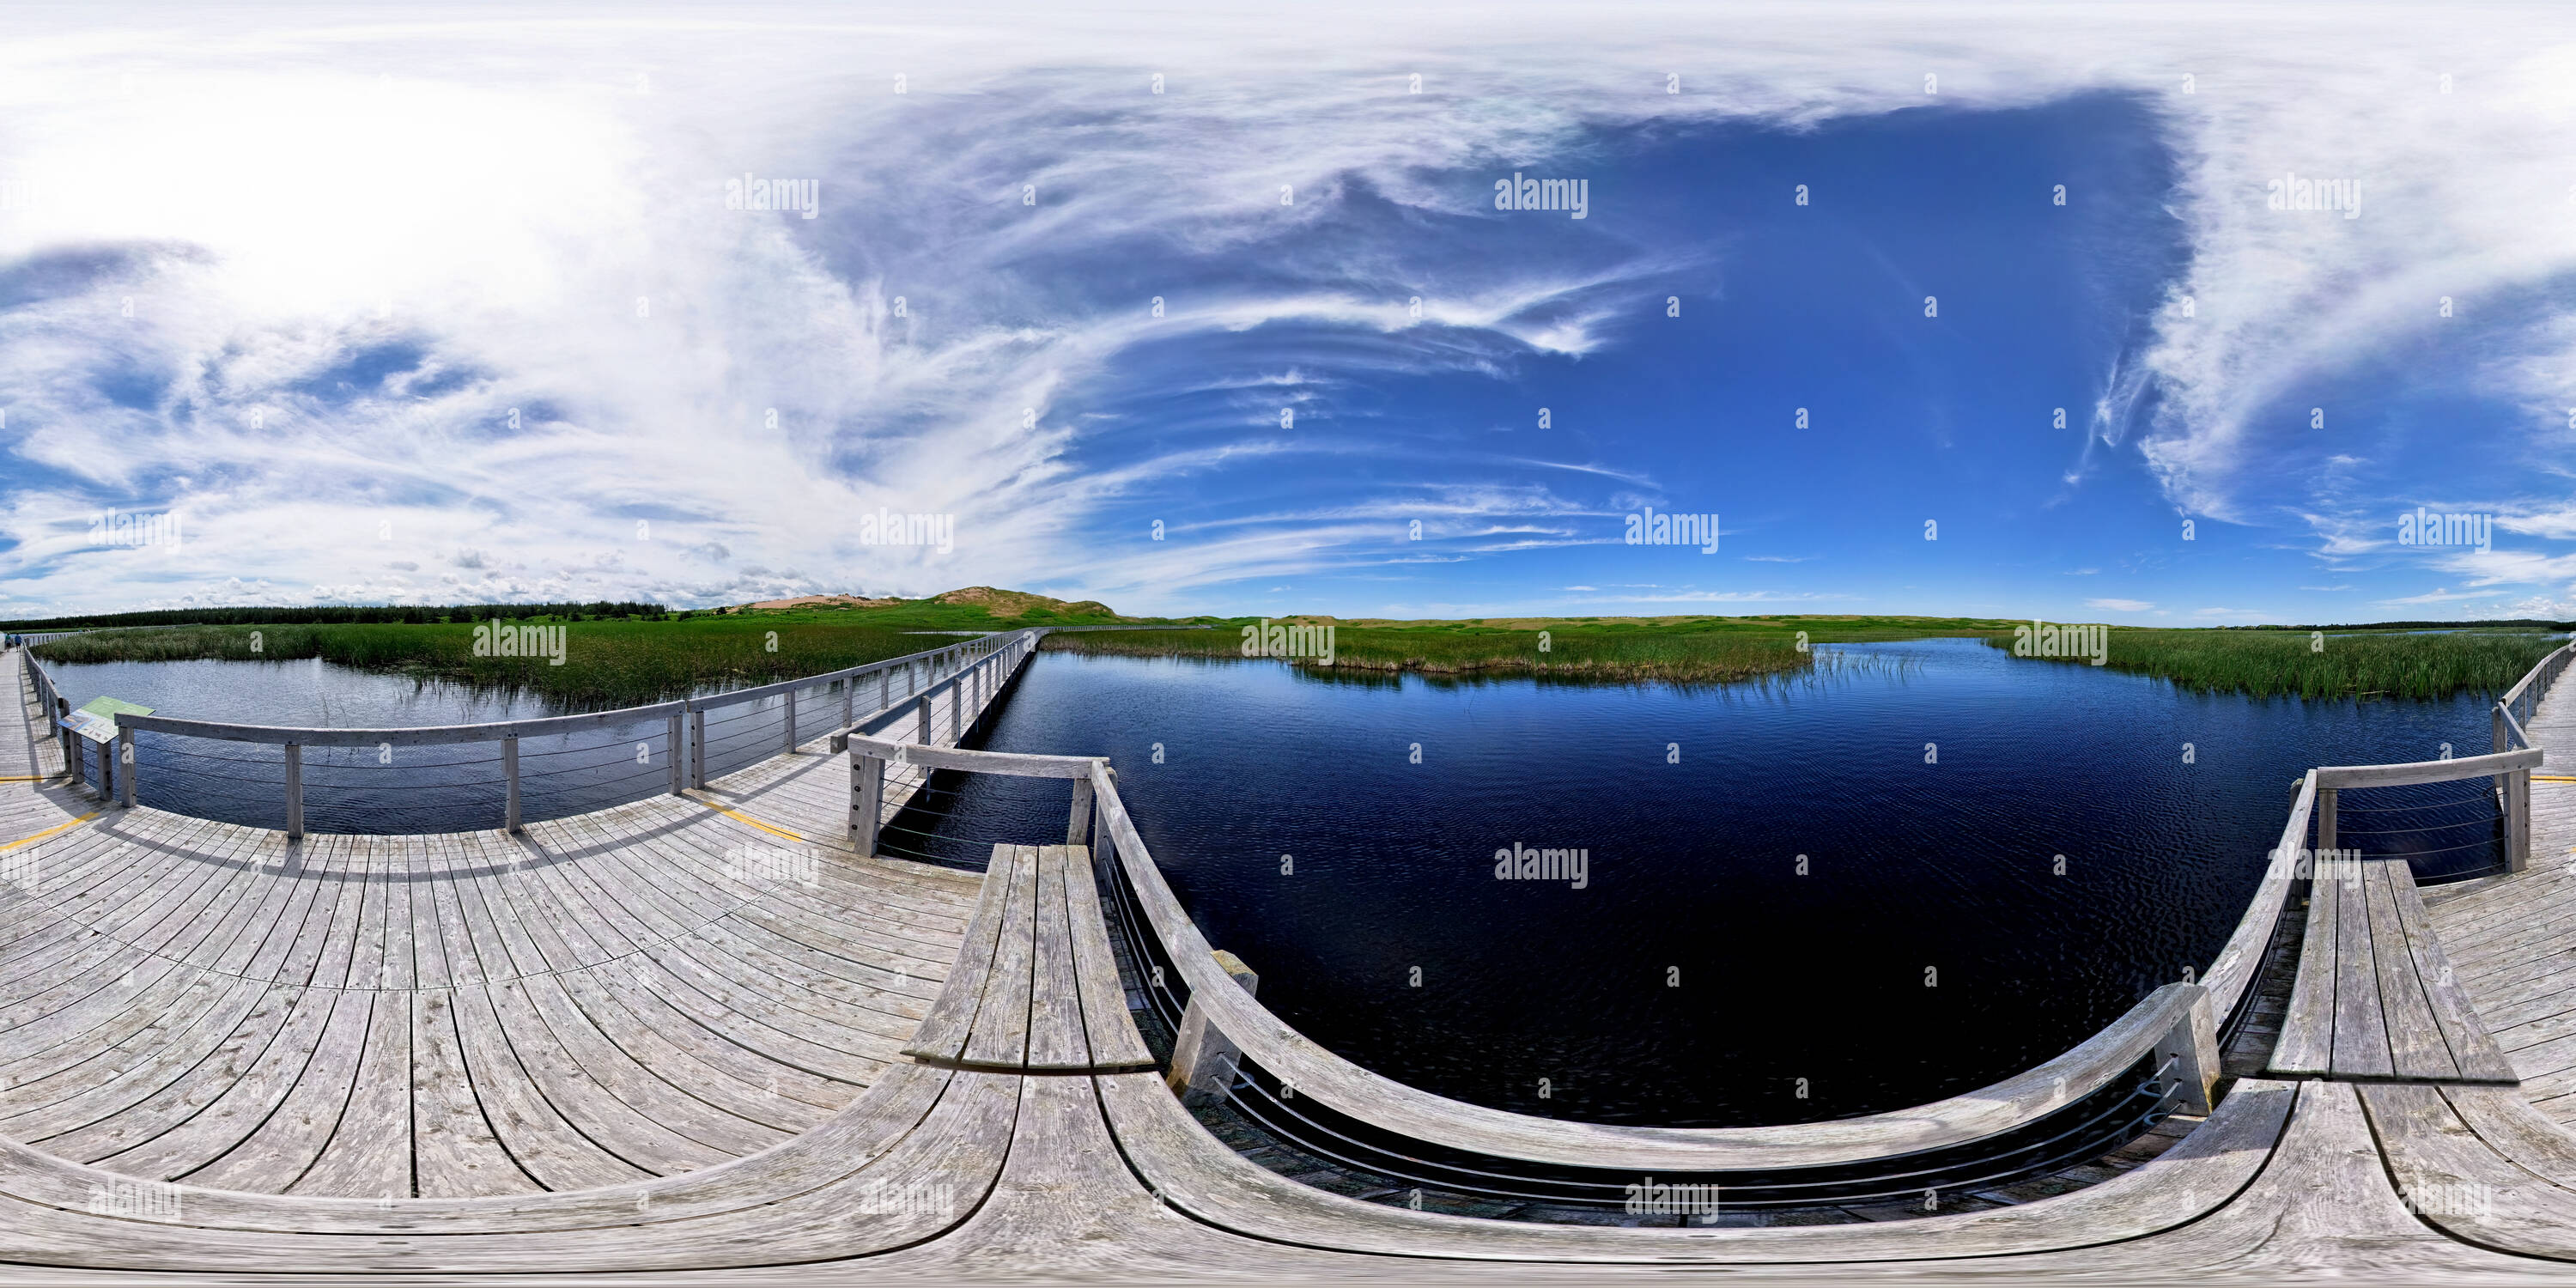 360 degree panoramic view of Bowley Pond, Greenwich, Prince Edward Island